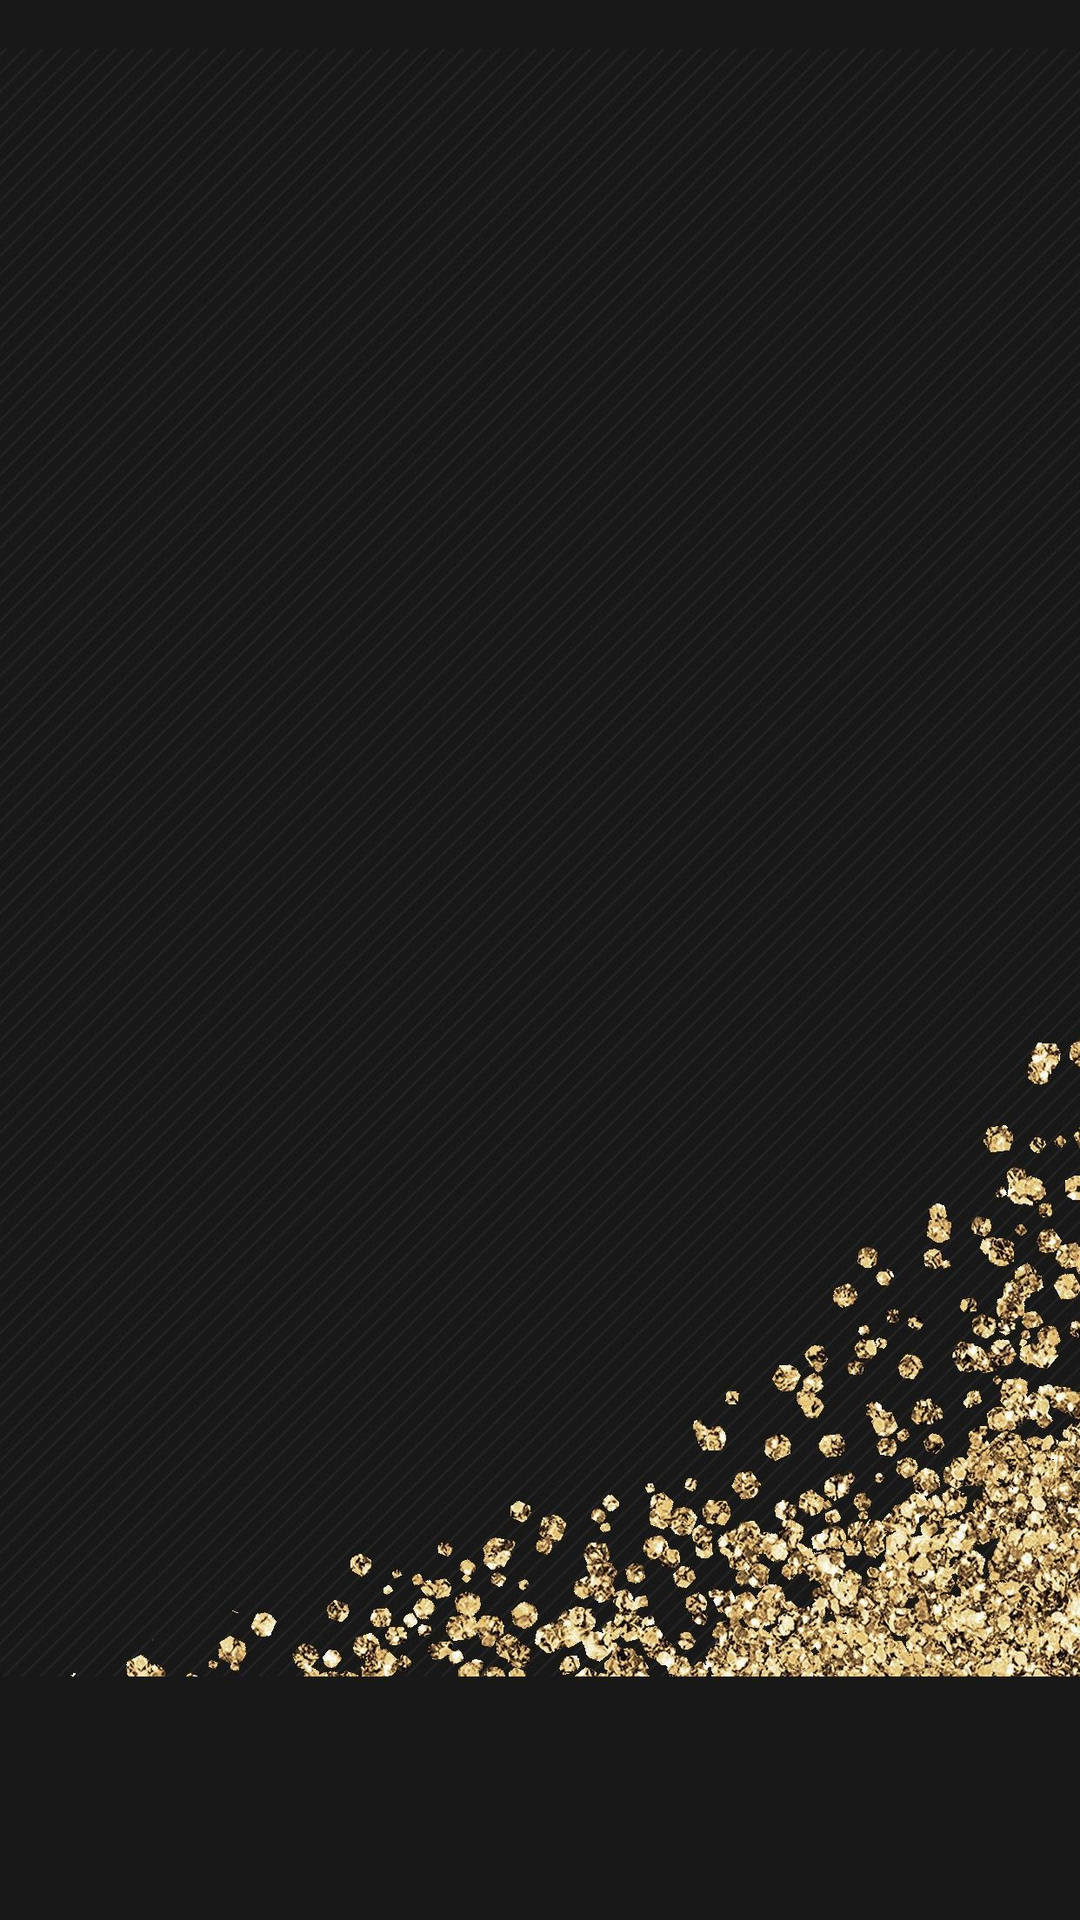 Download Dark Android Gold Crystal Wallpaper 